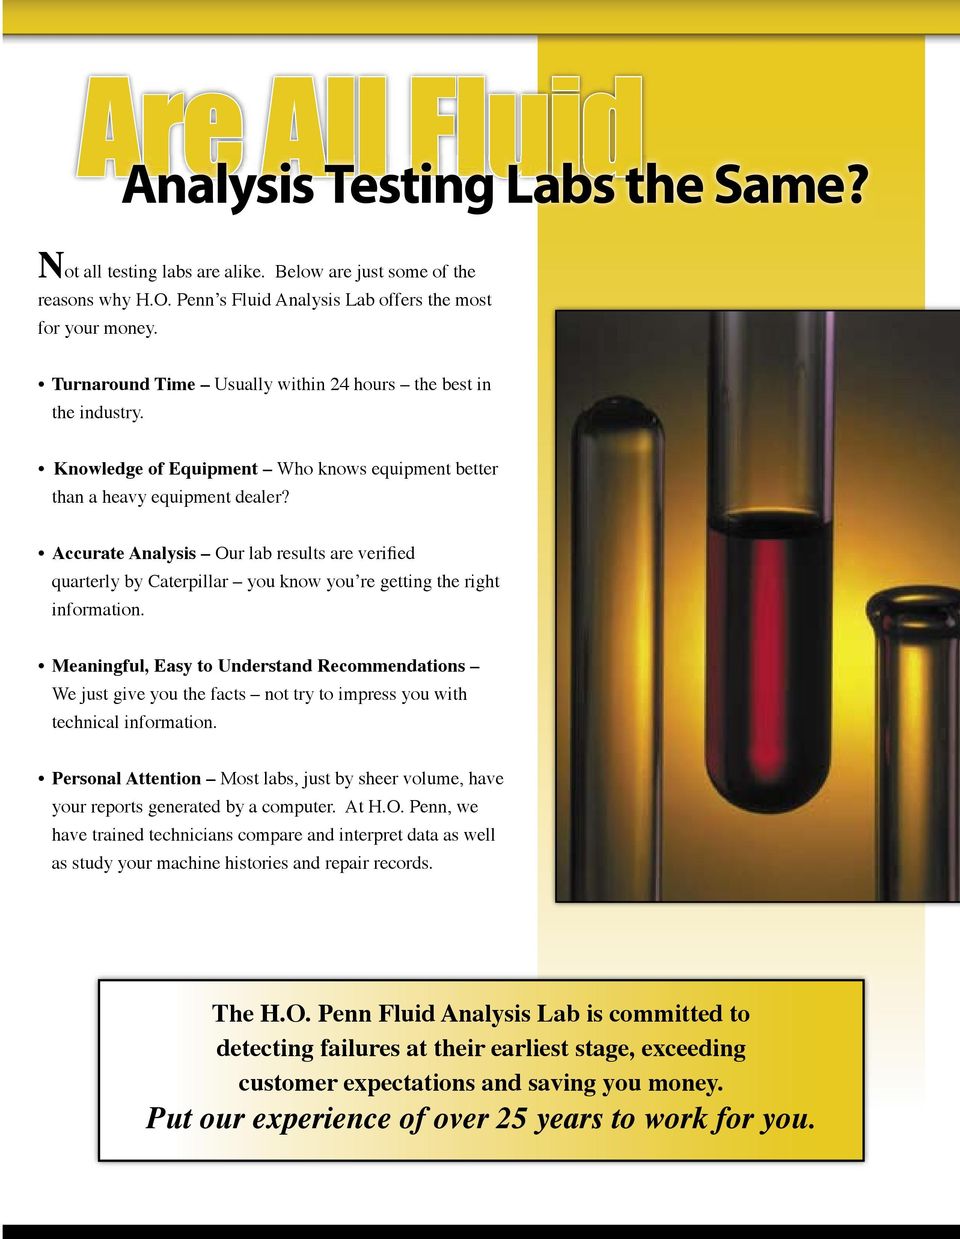 Accurate Analysis Our lab results are verified quarterly by Caterpillar you know youʼre getting the right information.